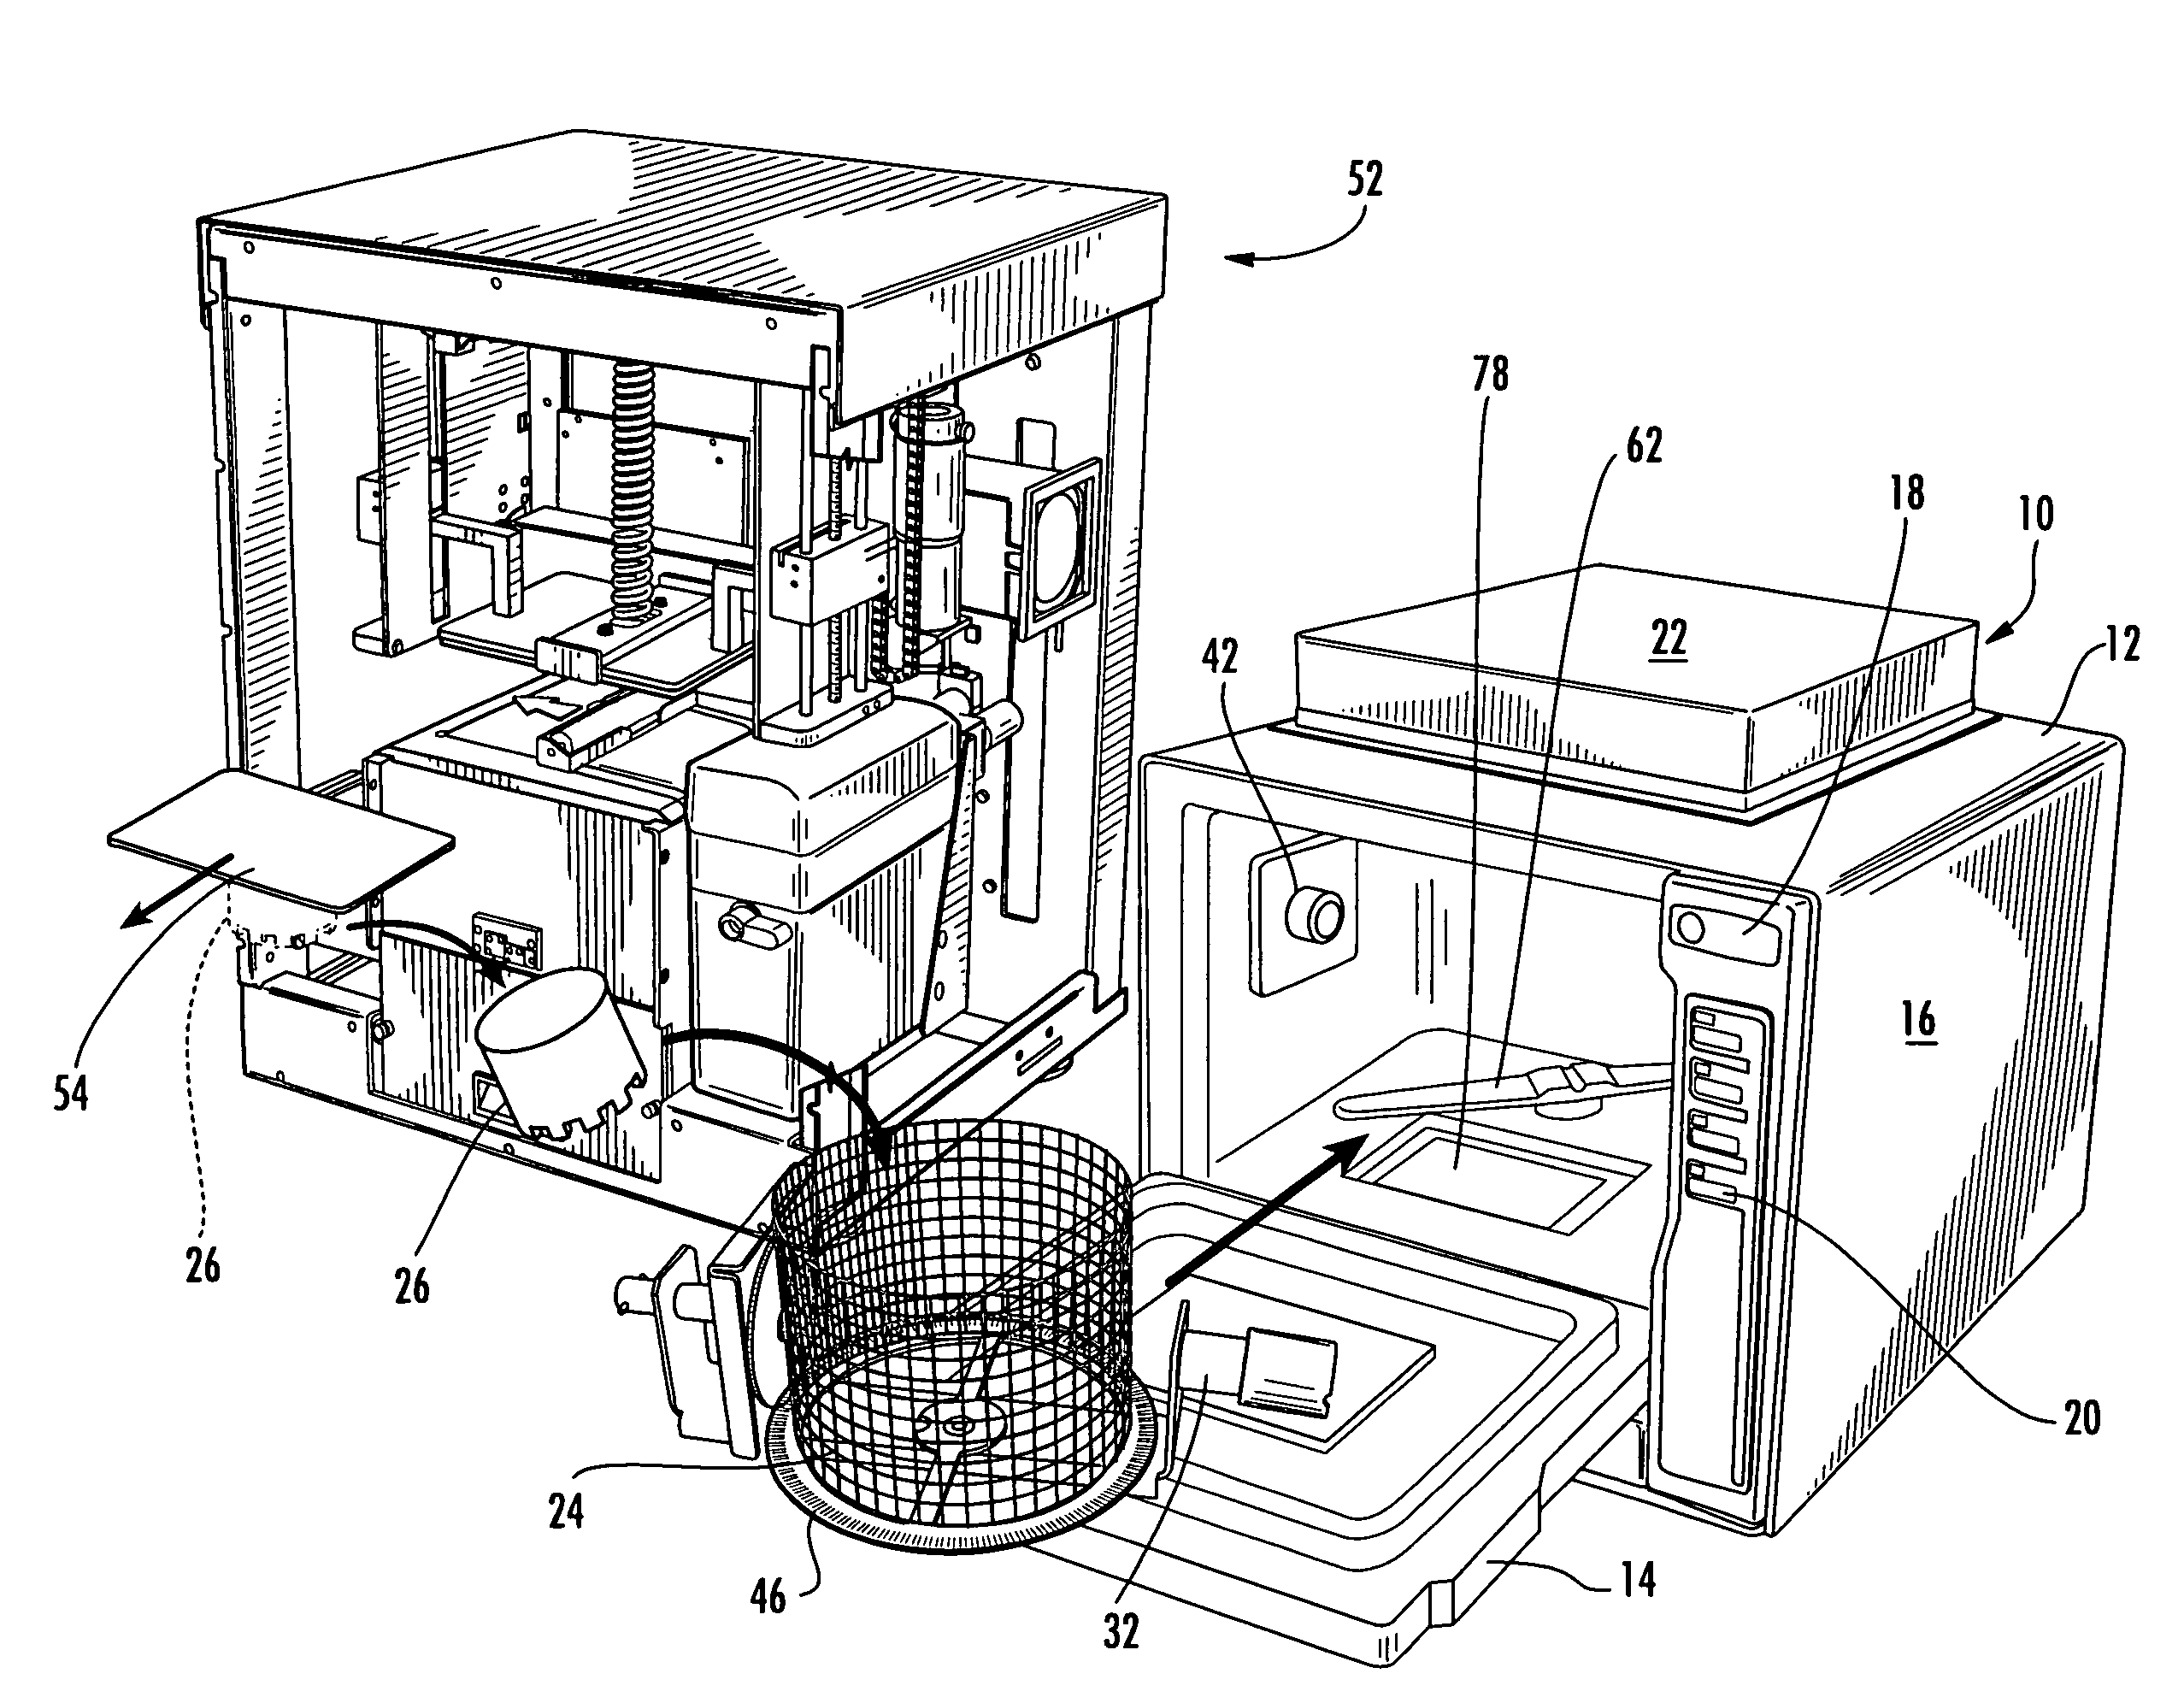 Methods for Cleaning and Curing Solid Freeform Fabrication Parts